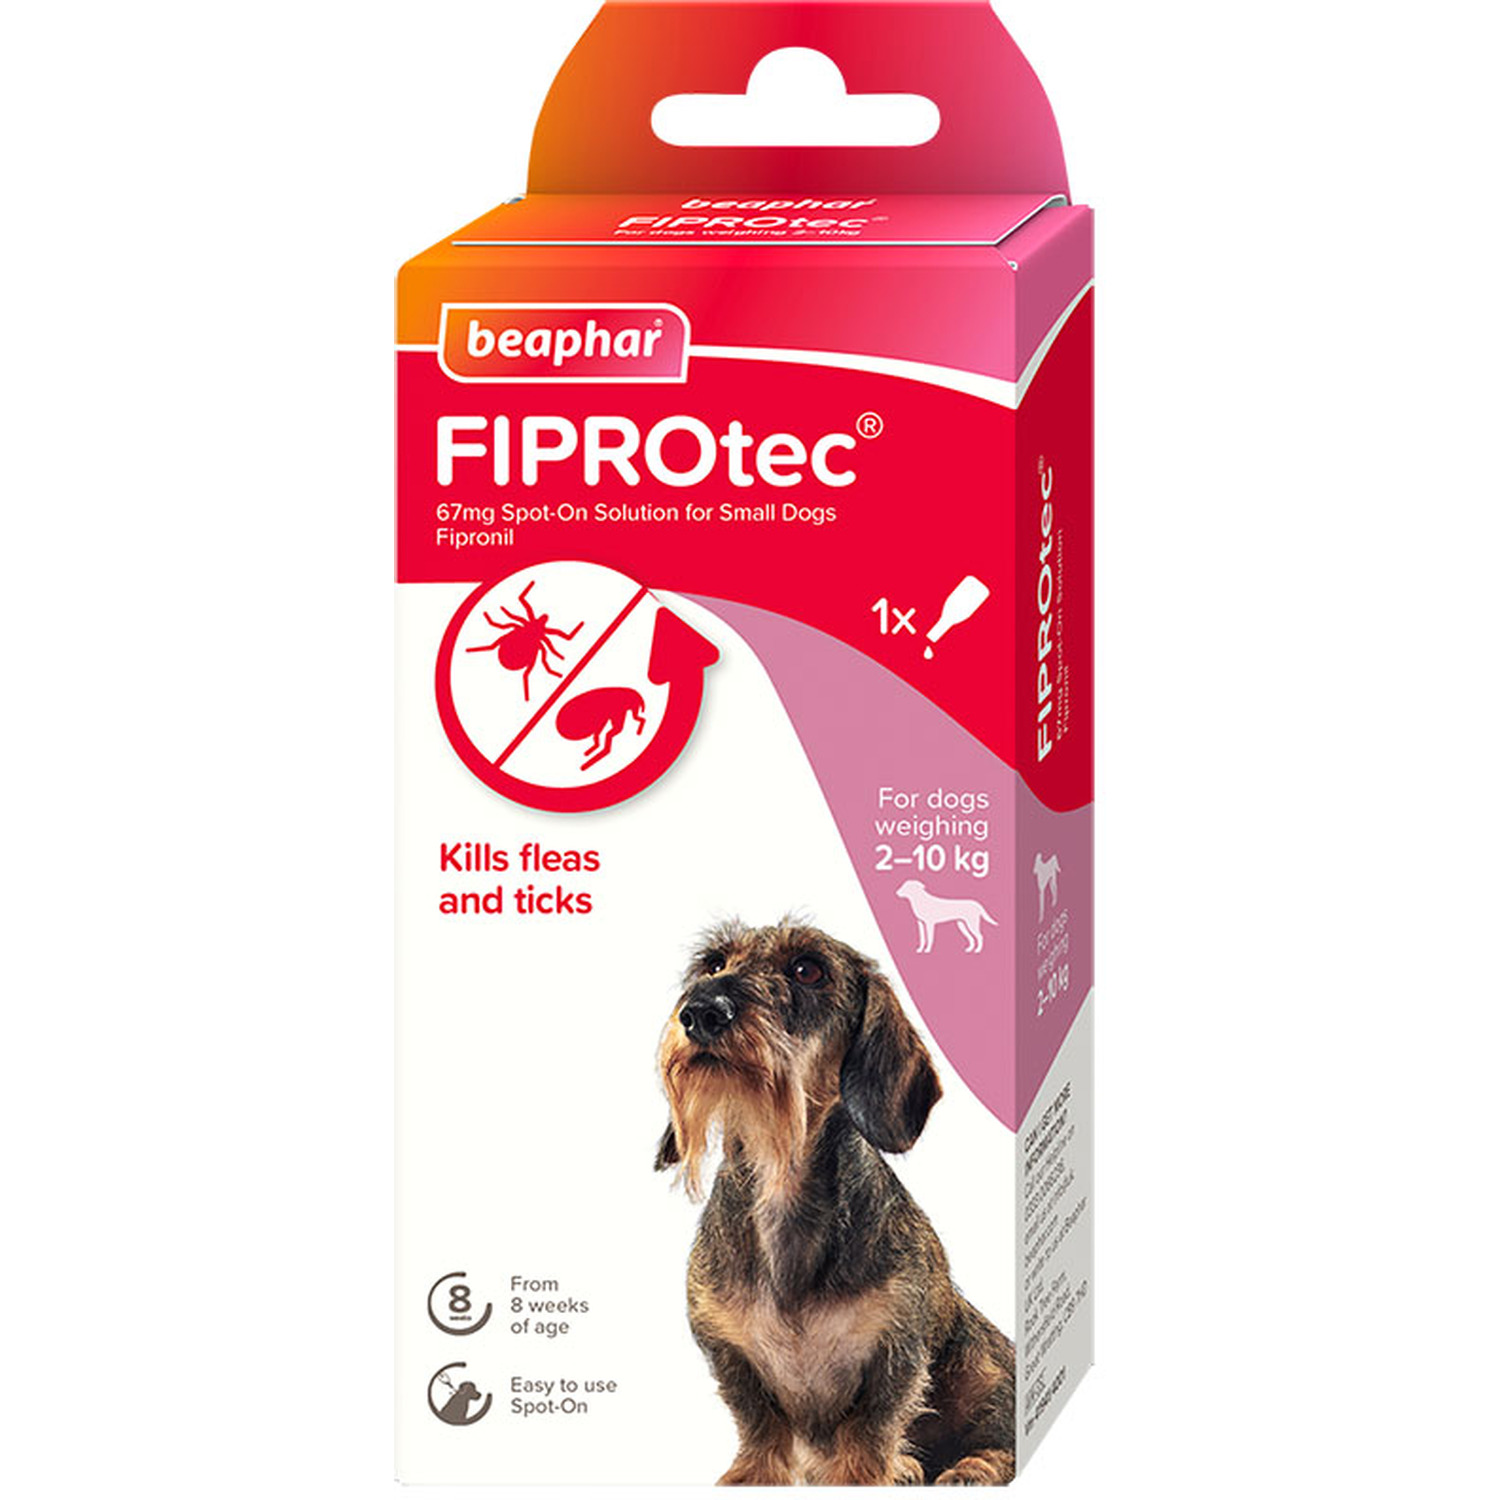 Beaphar Fiprotec Spot On Solution for Small Dogs - 1 Image